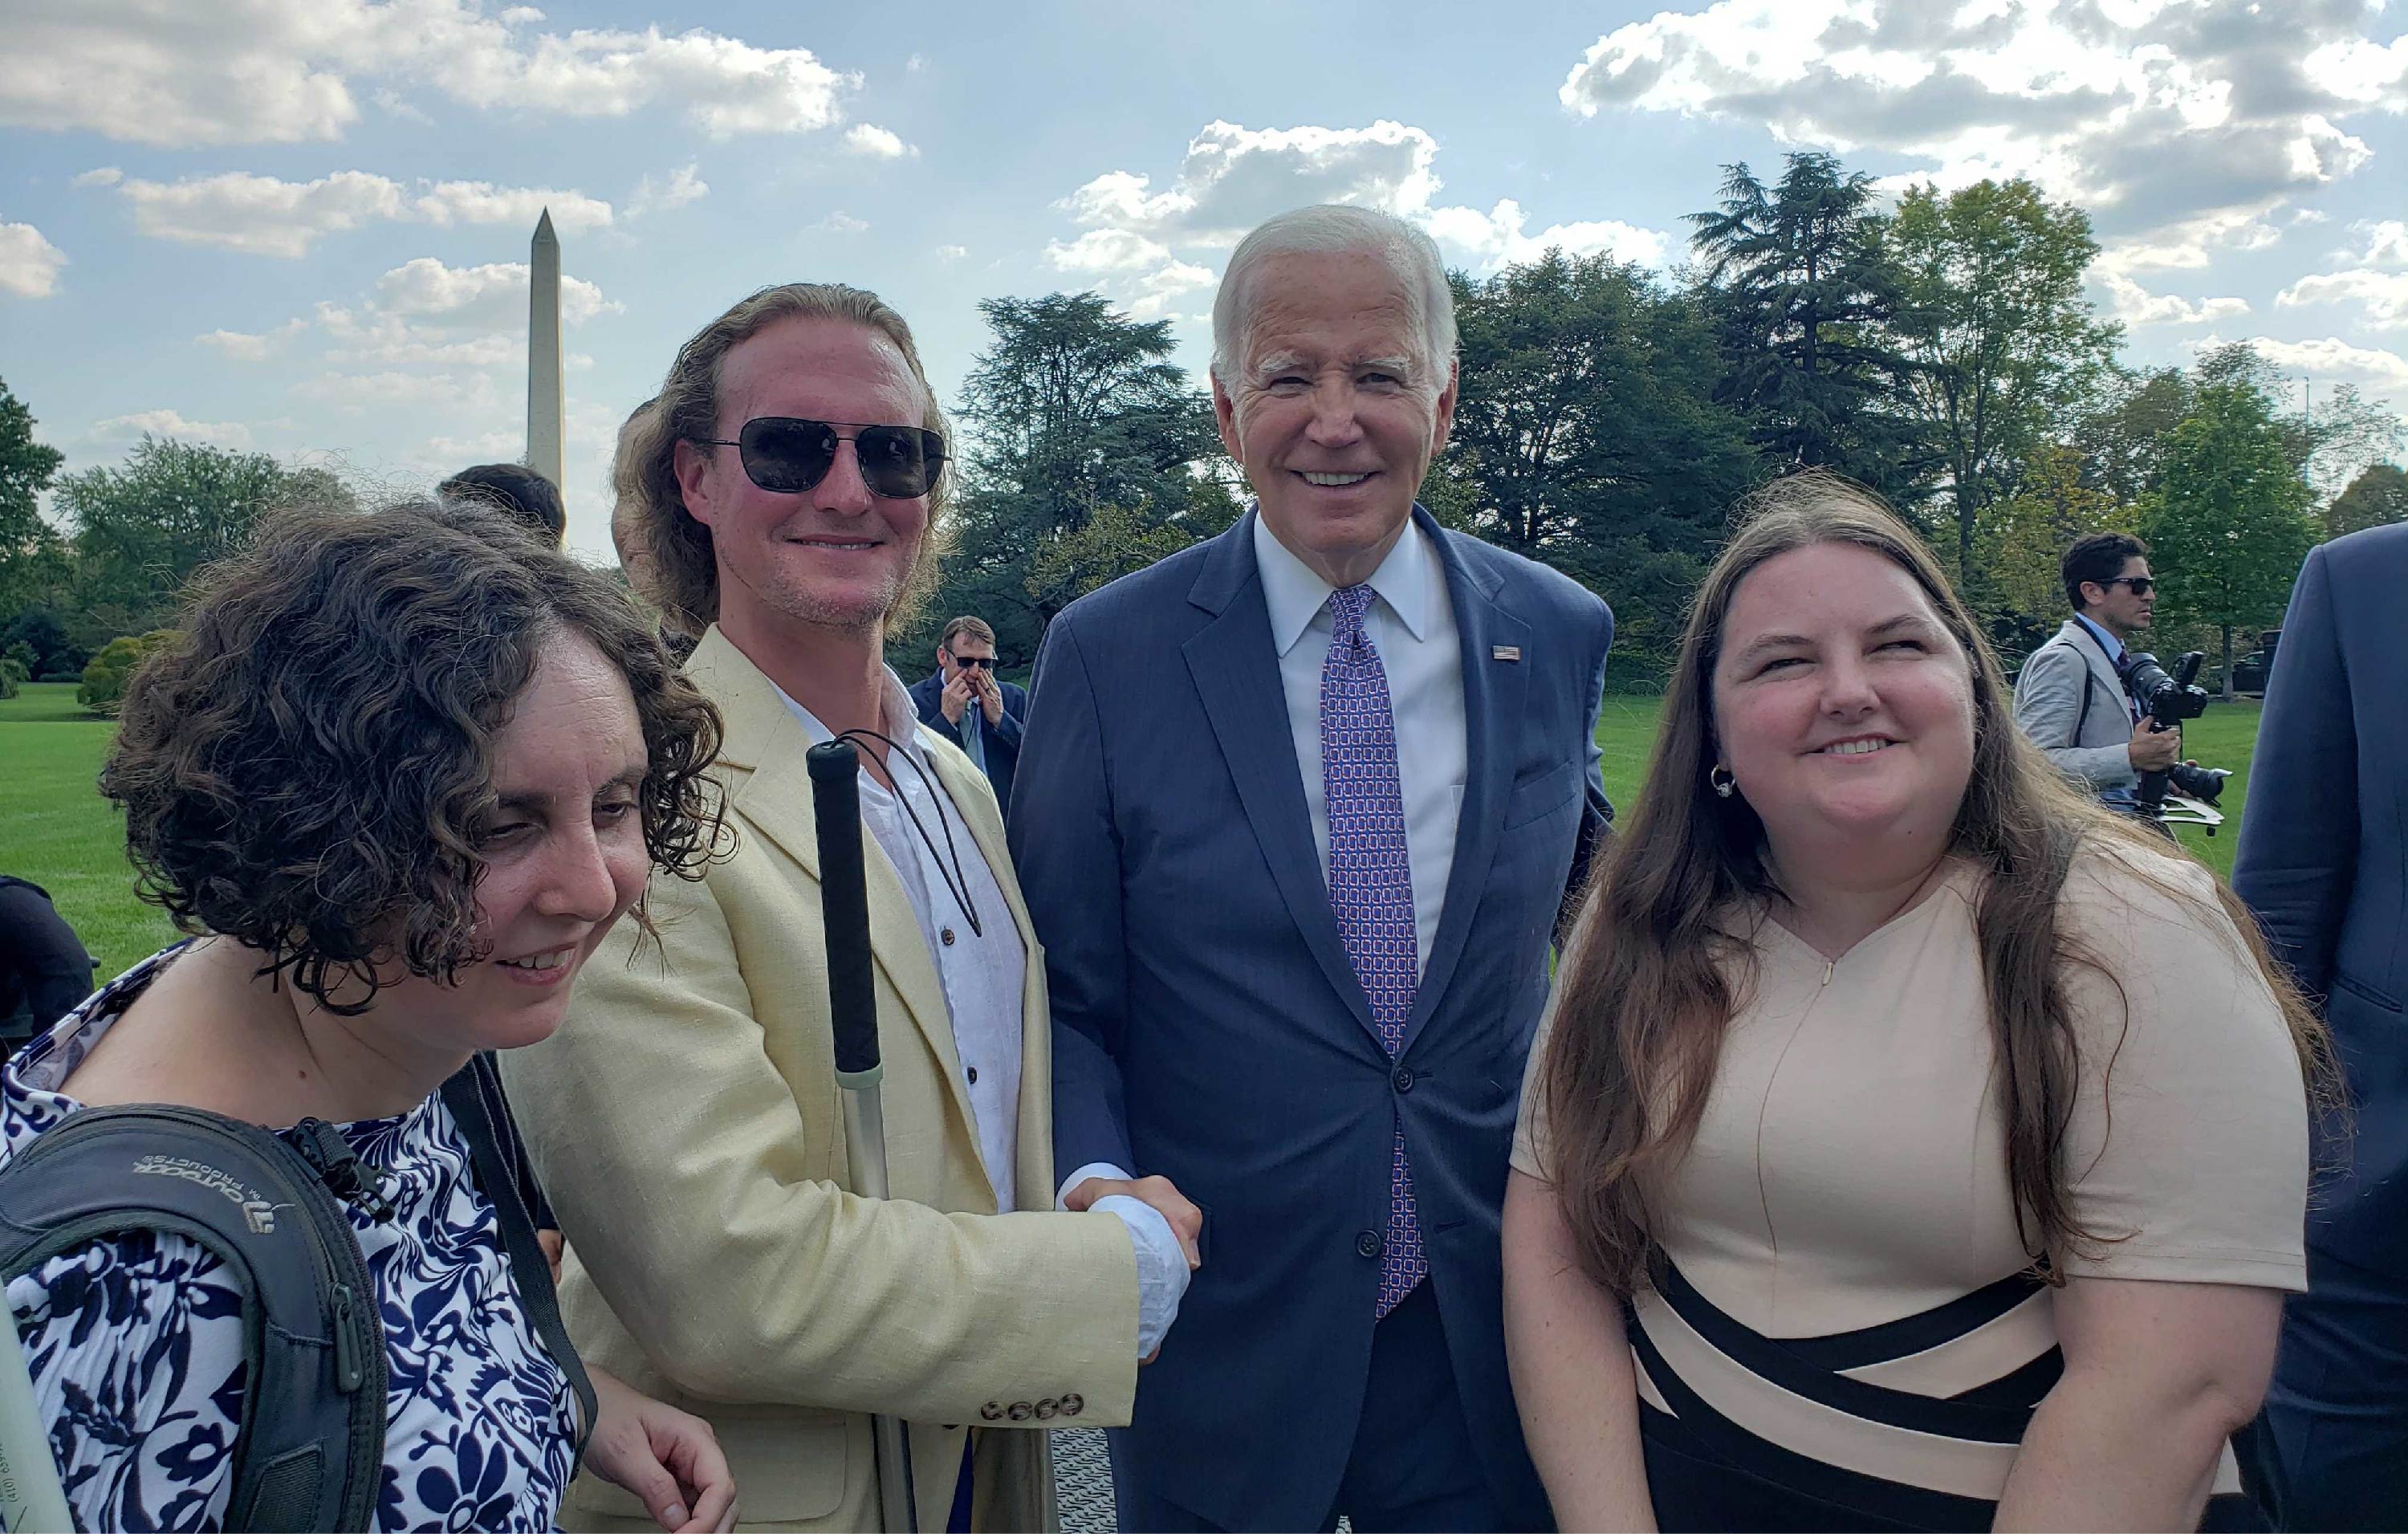 Dr. Arielle Silverman with President Biden and colleagues in front of Washington monument.